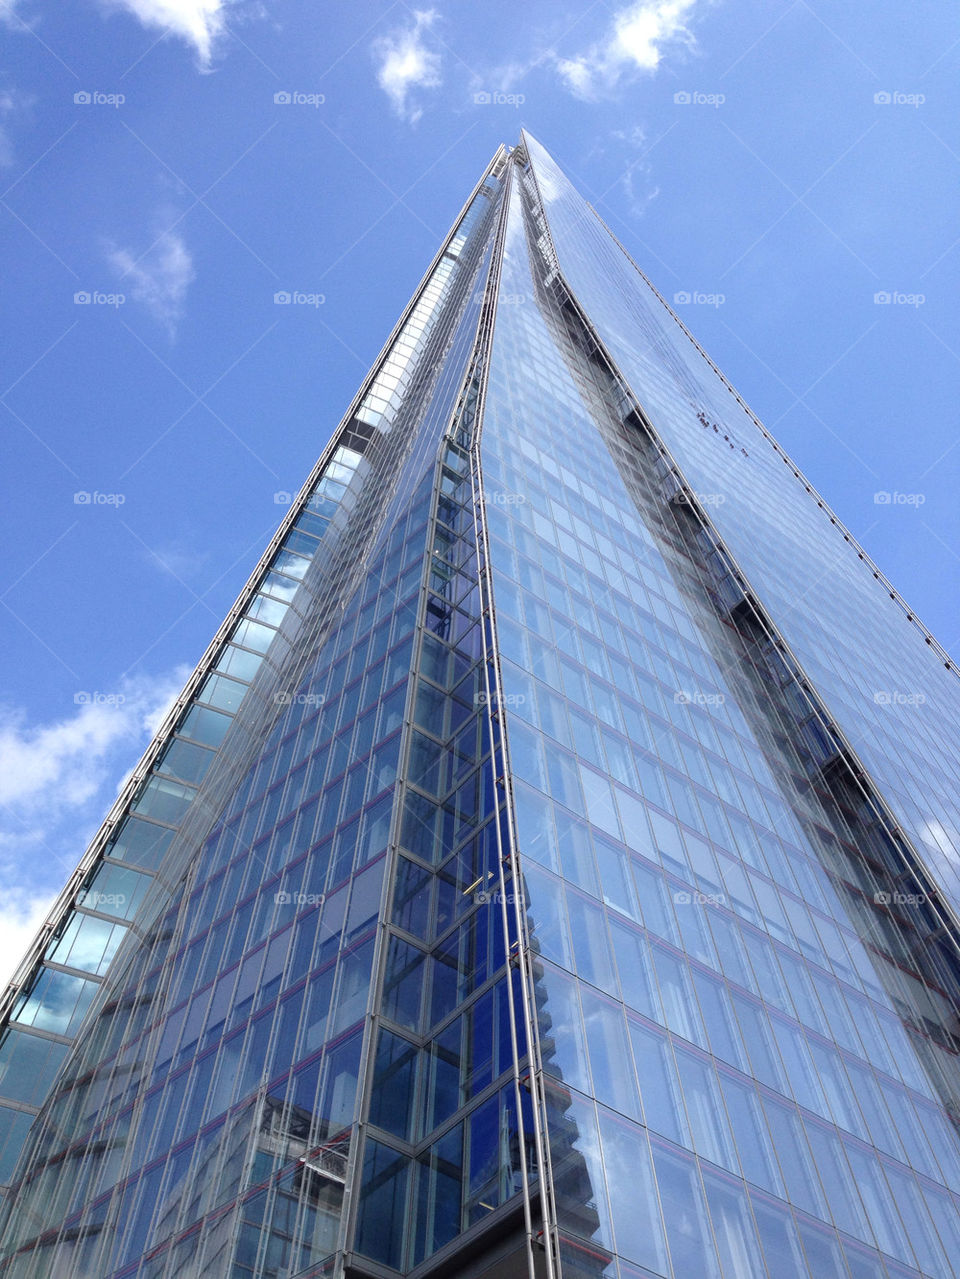 The Shard from below